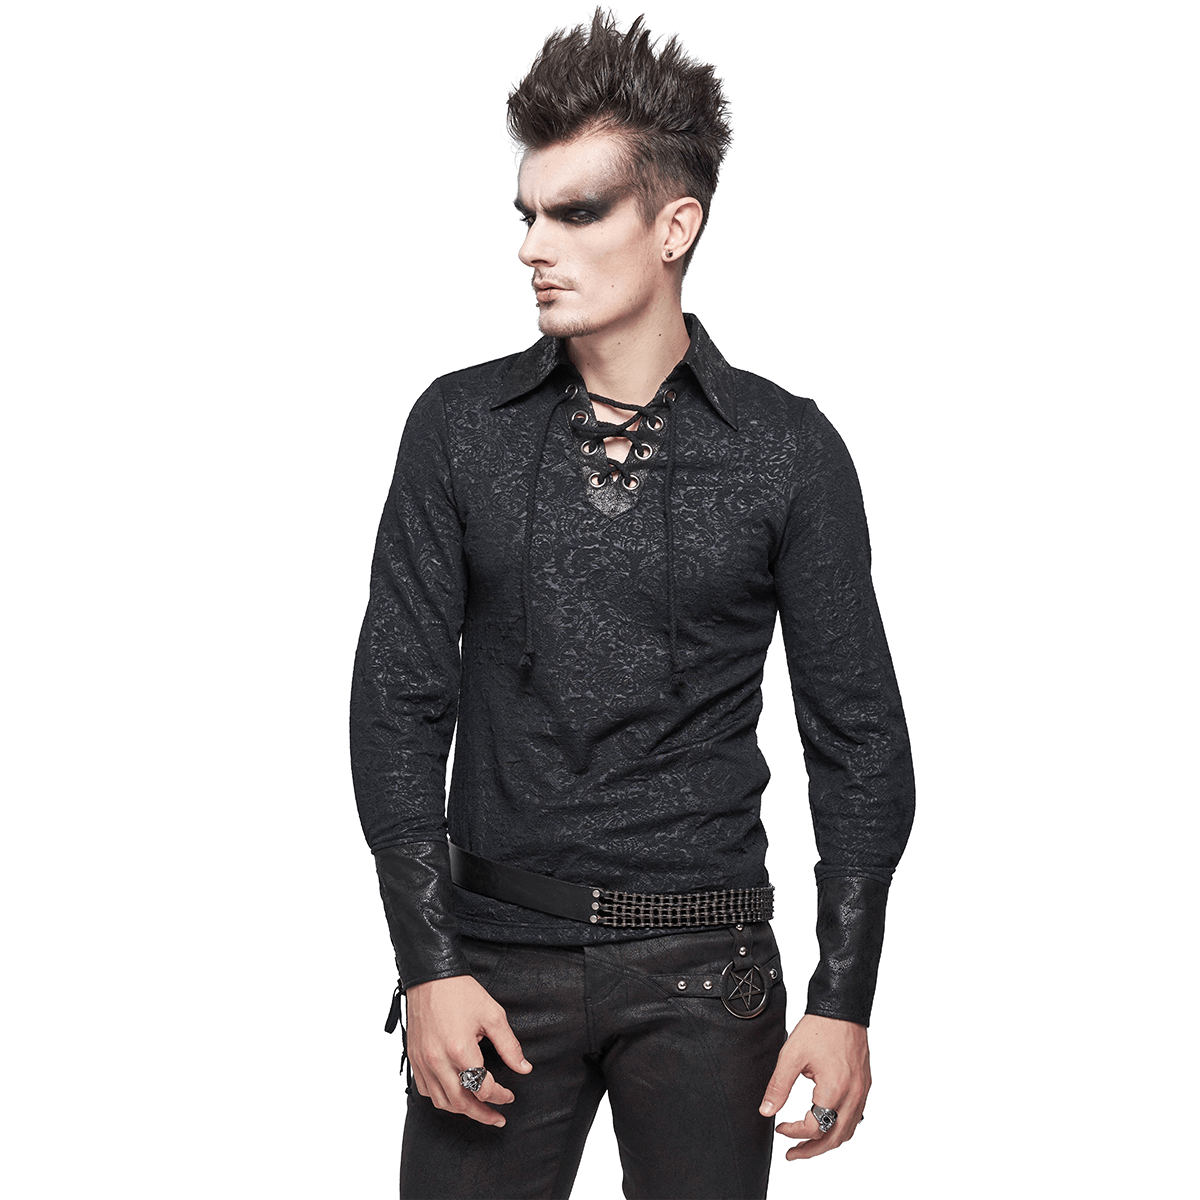 Gothic Turn-down Collar Strappy Shirt / Jacquard Long Sleeve Shirt with Lace Up - HARD'N'HEAVY